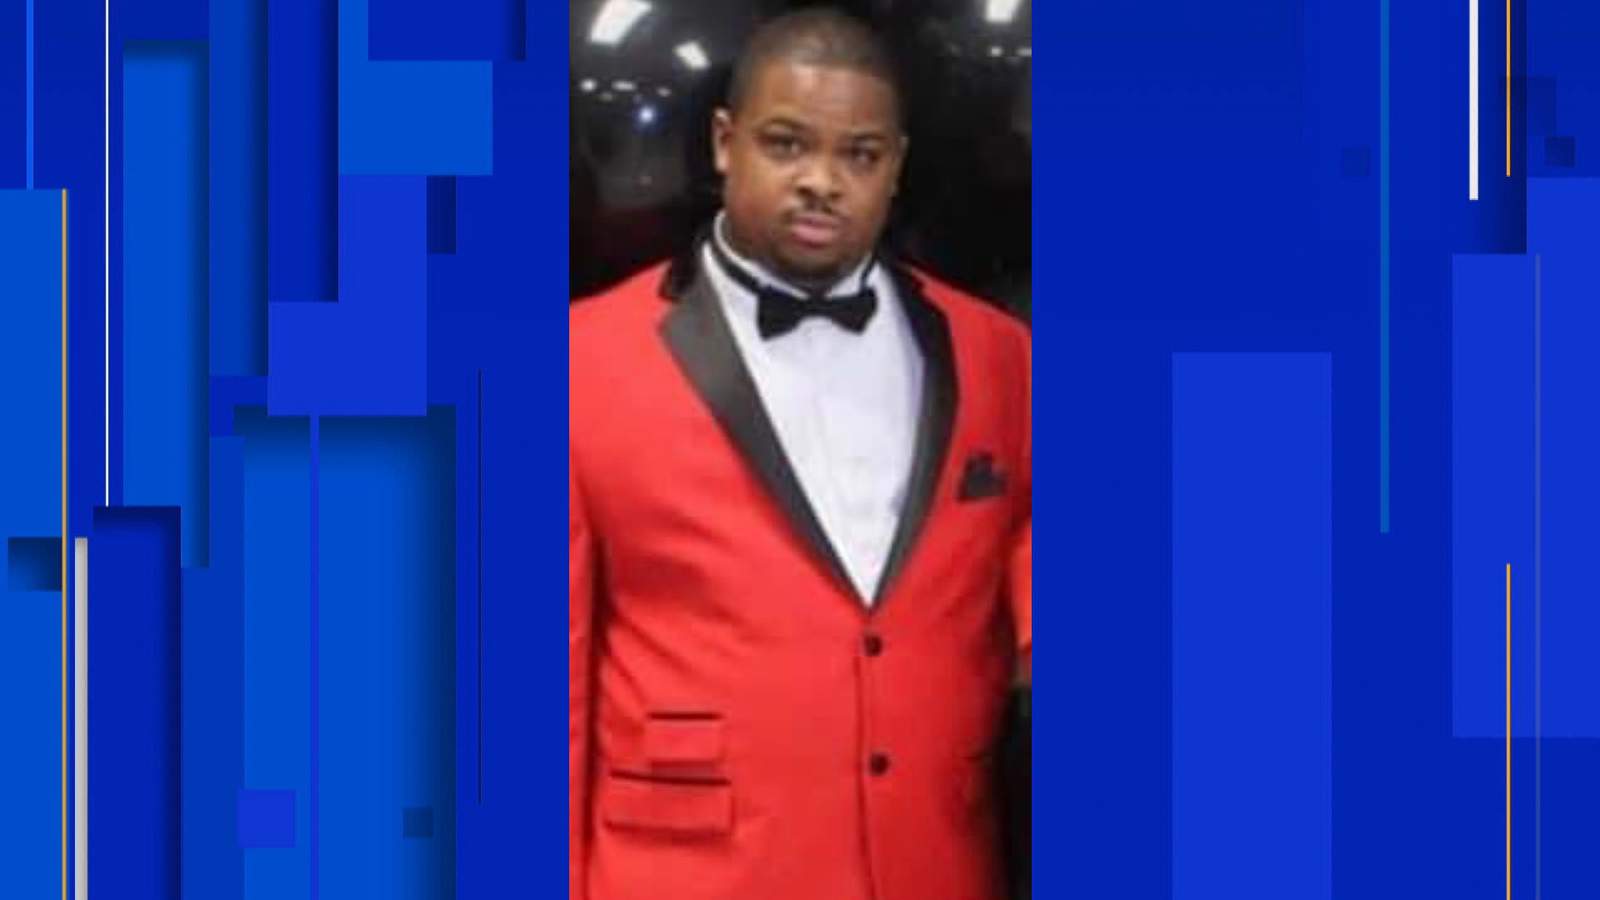 Detroit police want help finding missing 36-year-old man